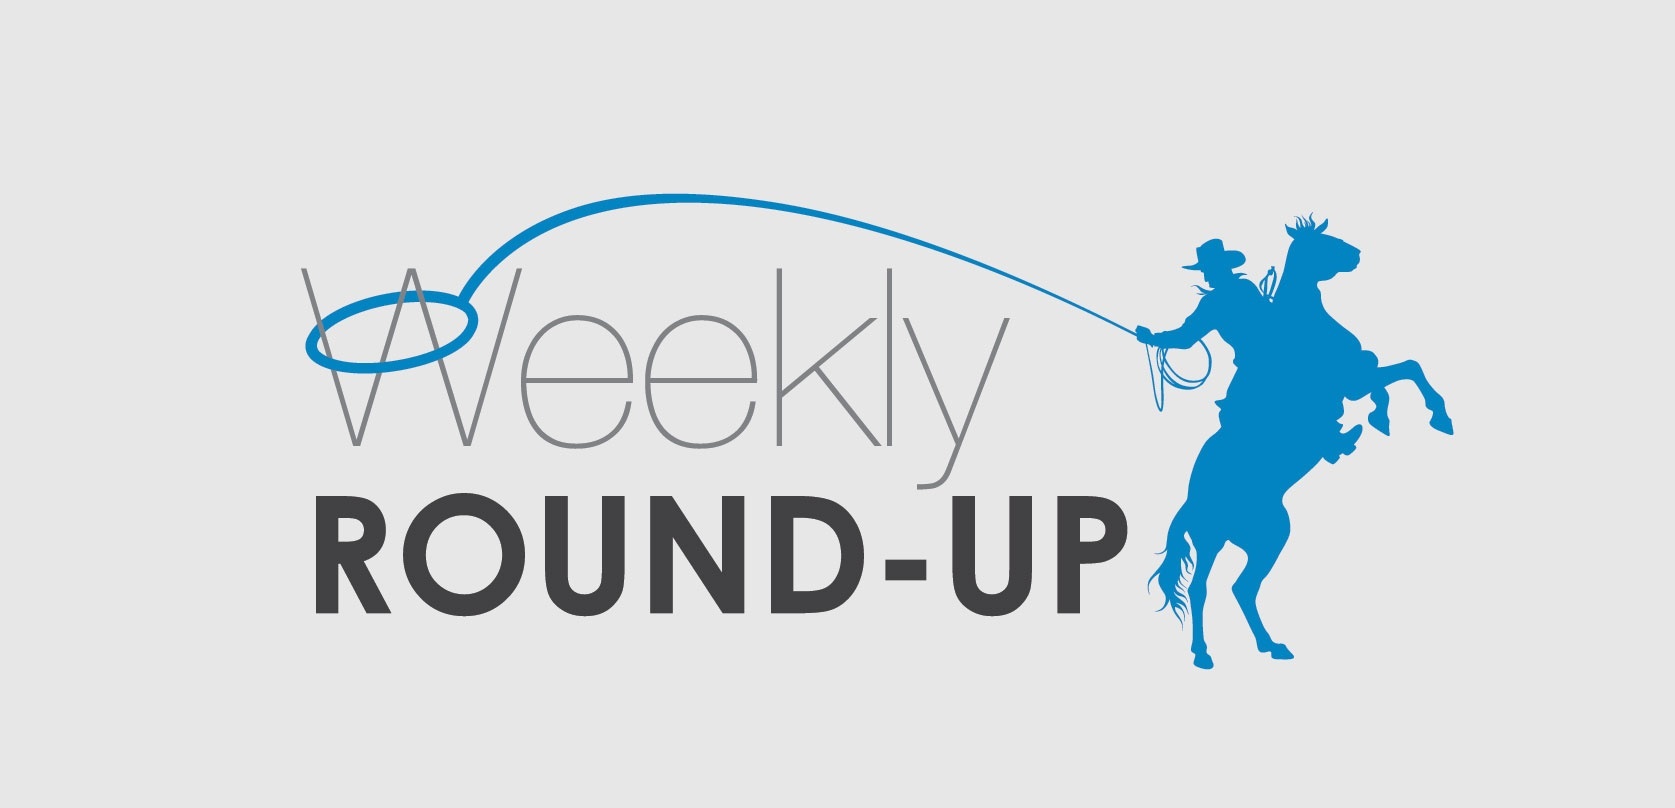 Weekly_Round_Up_V.1-22